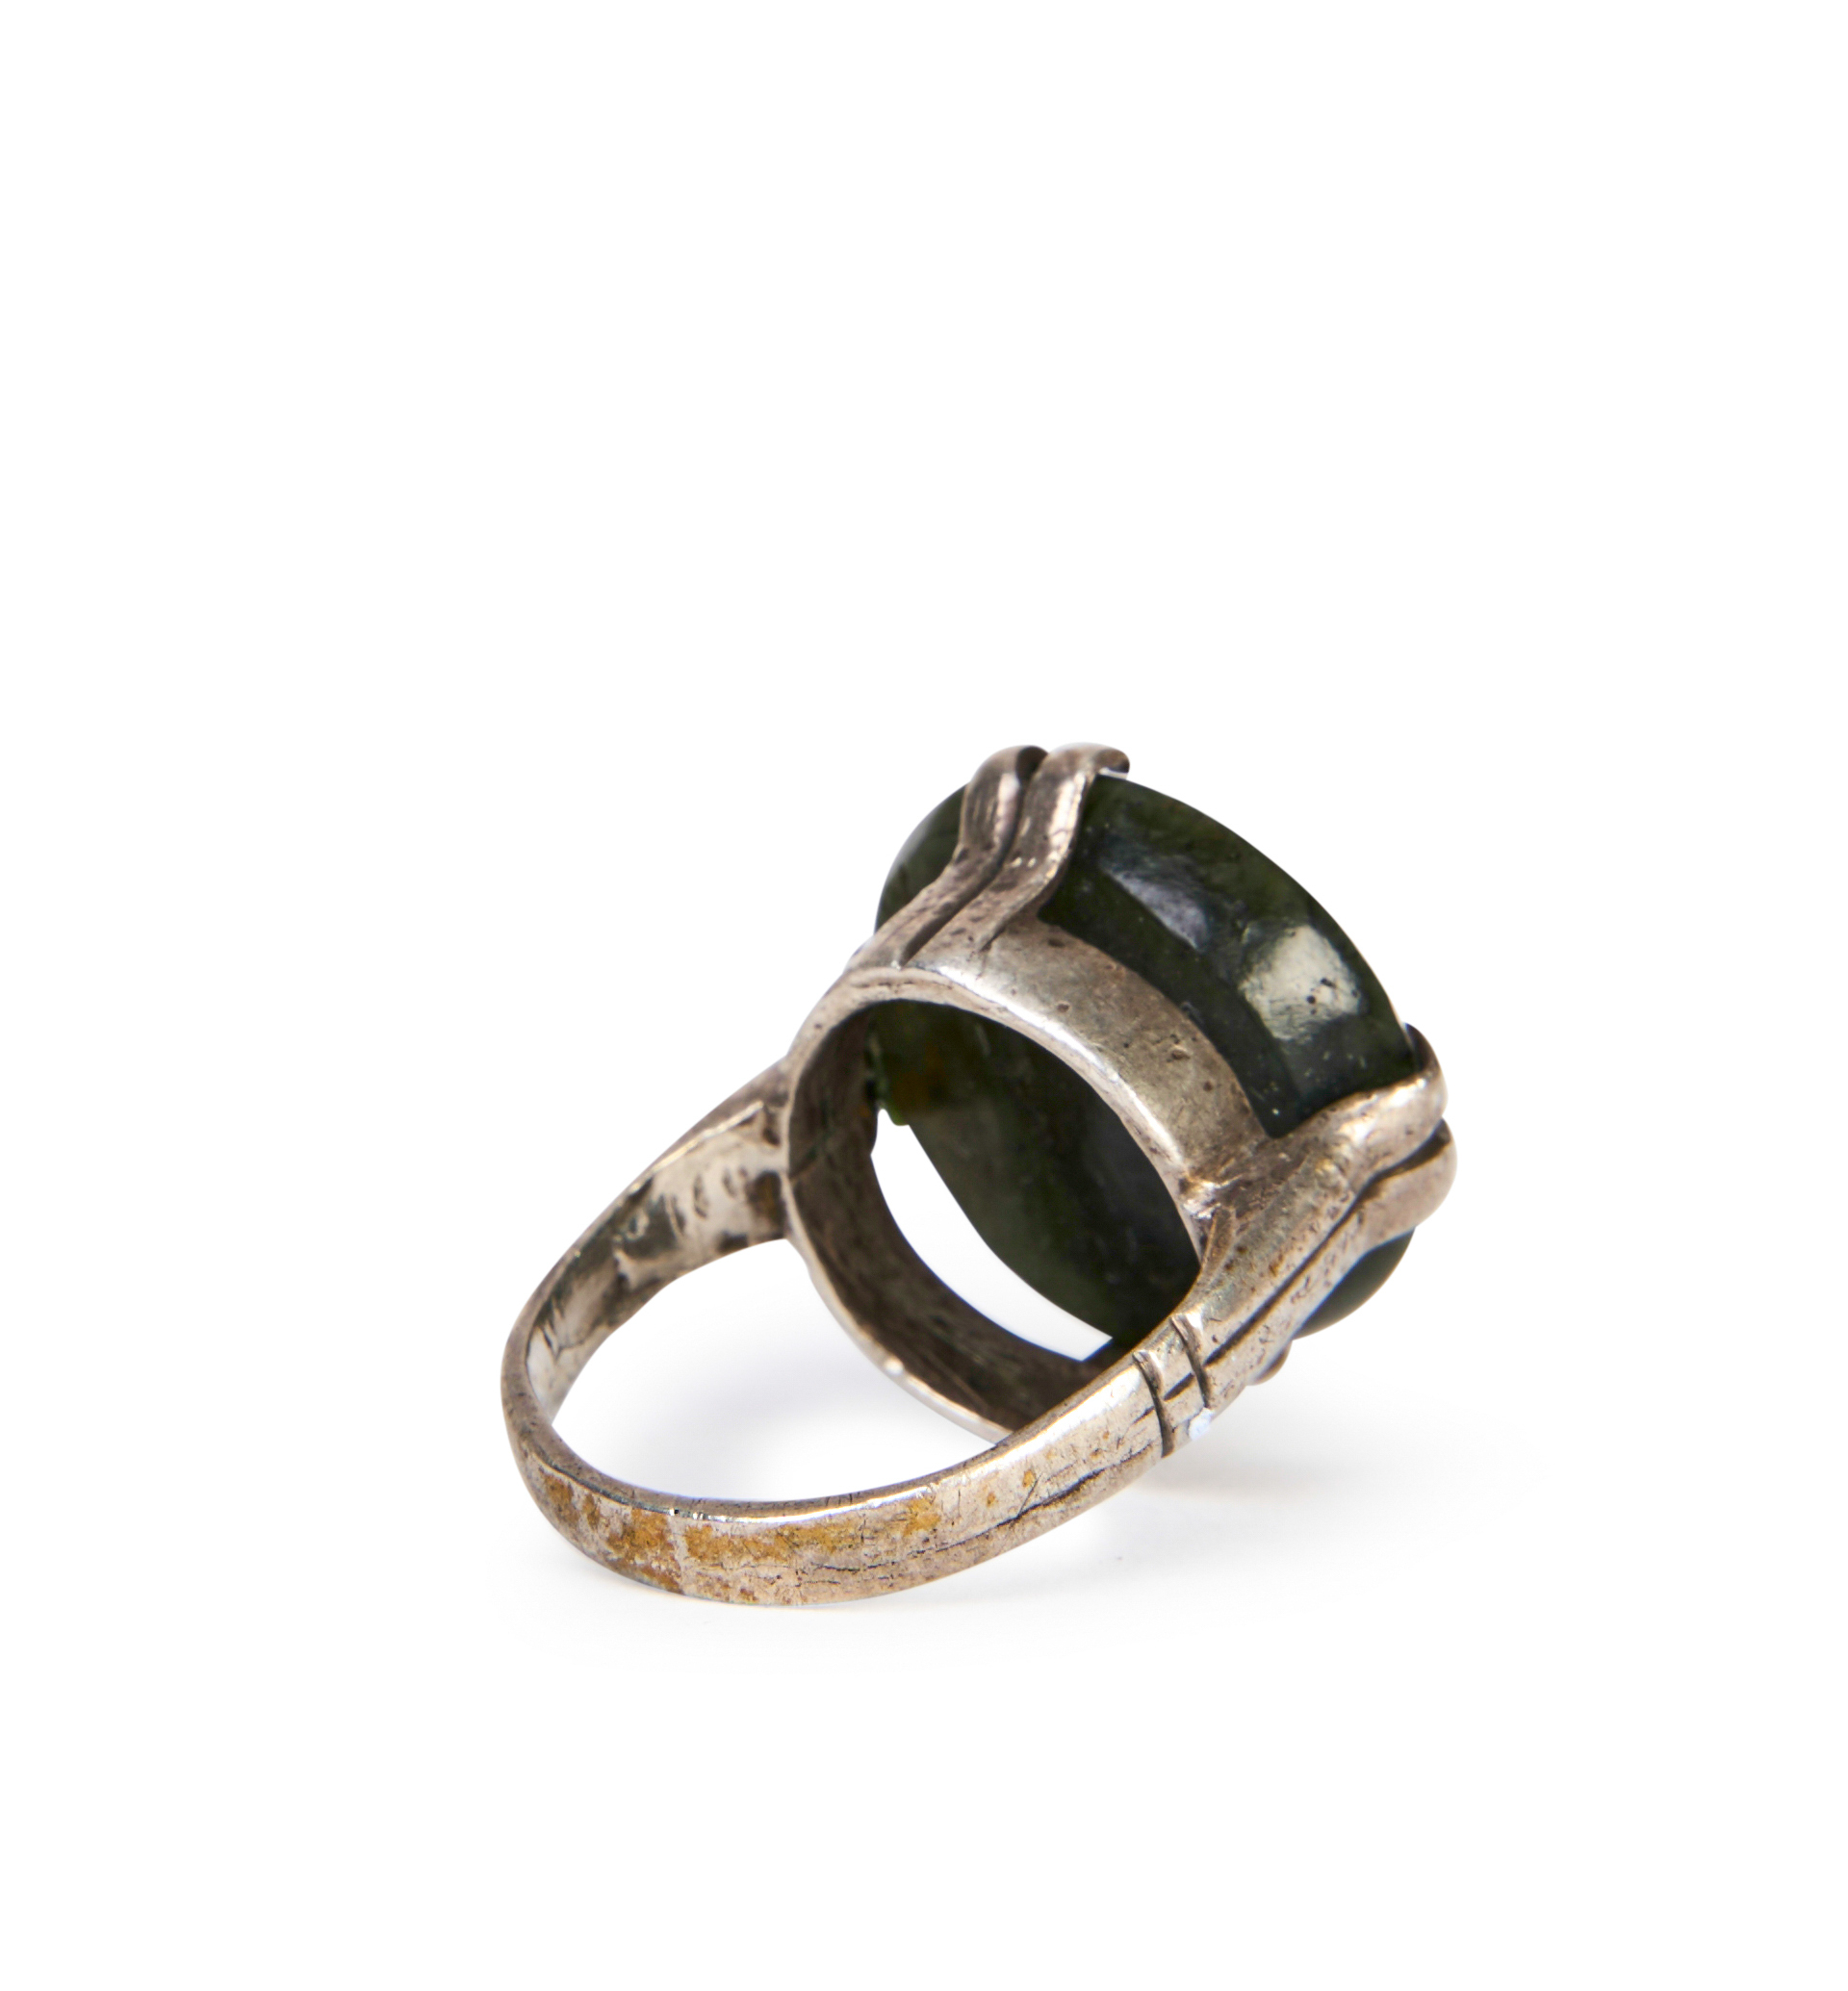 A TIMURID JADE CALLIGRAPHIC INSCRIBED SEAL RING SET ON SILVER, 15TH CENTURY - Image 3 of 3